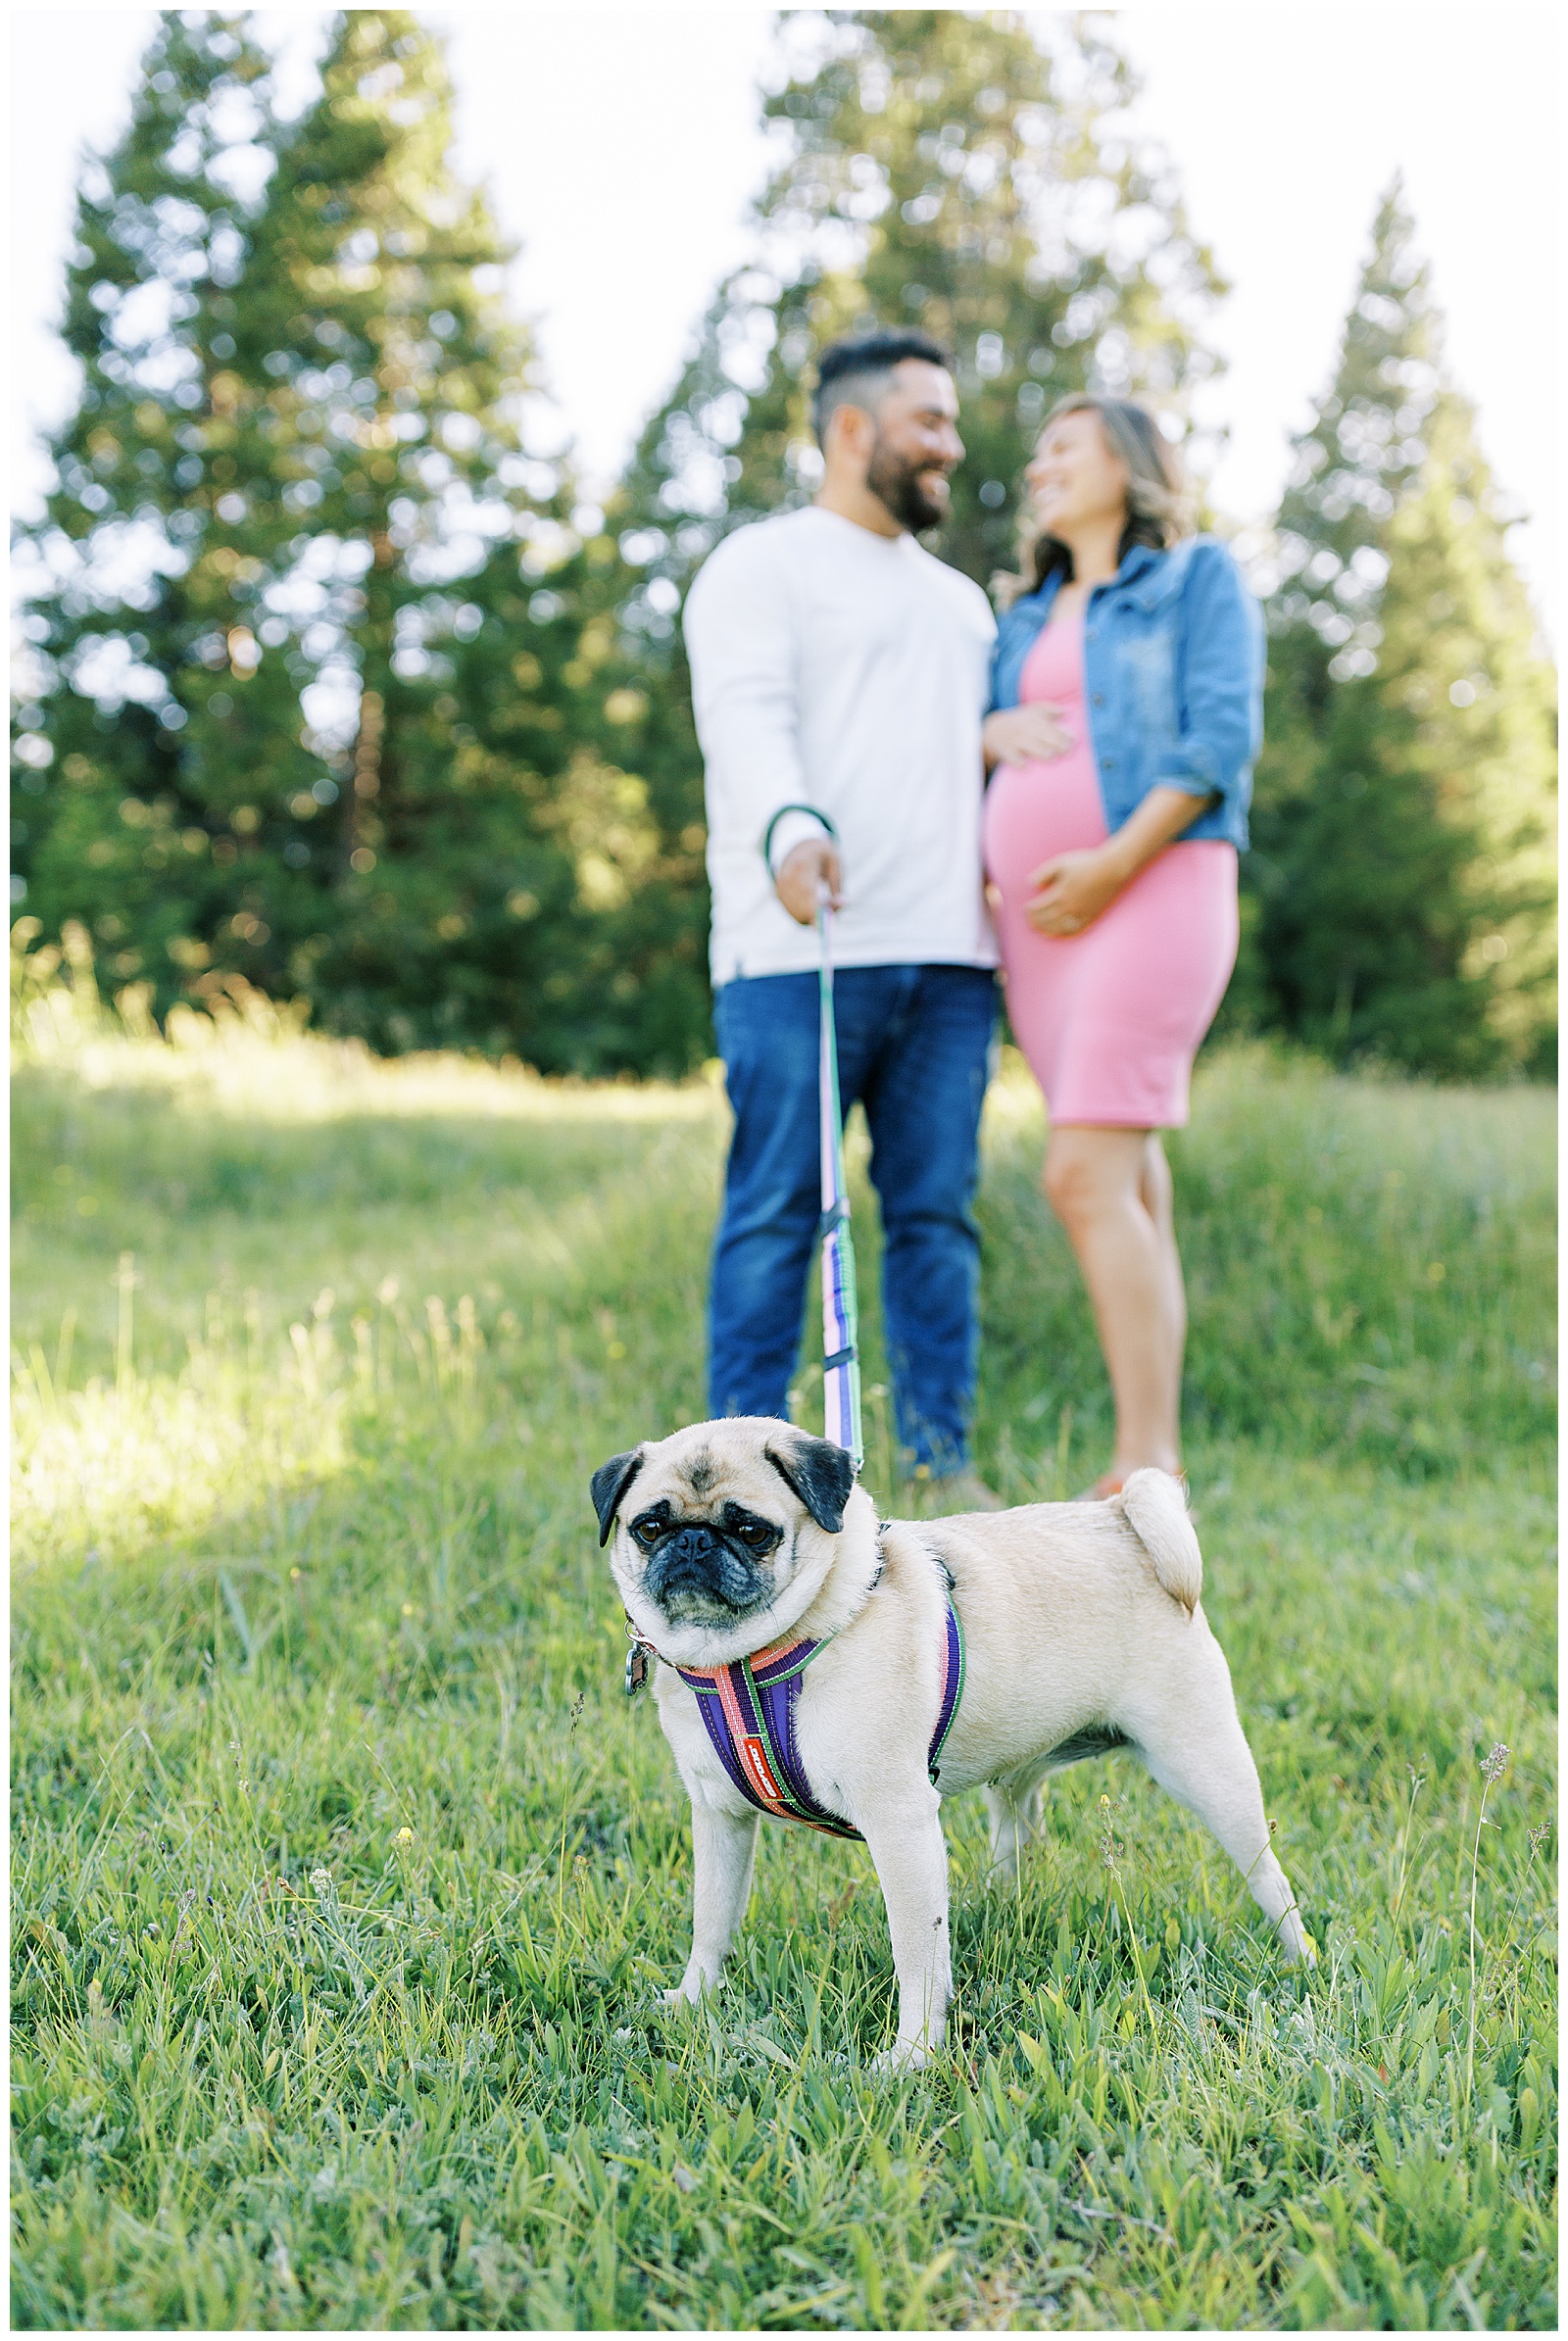 pug in grass on a leash with man and pregnant woman standing in background